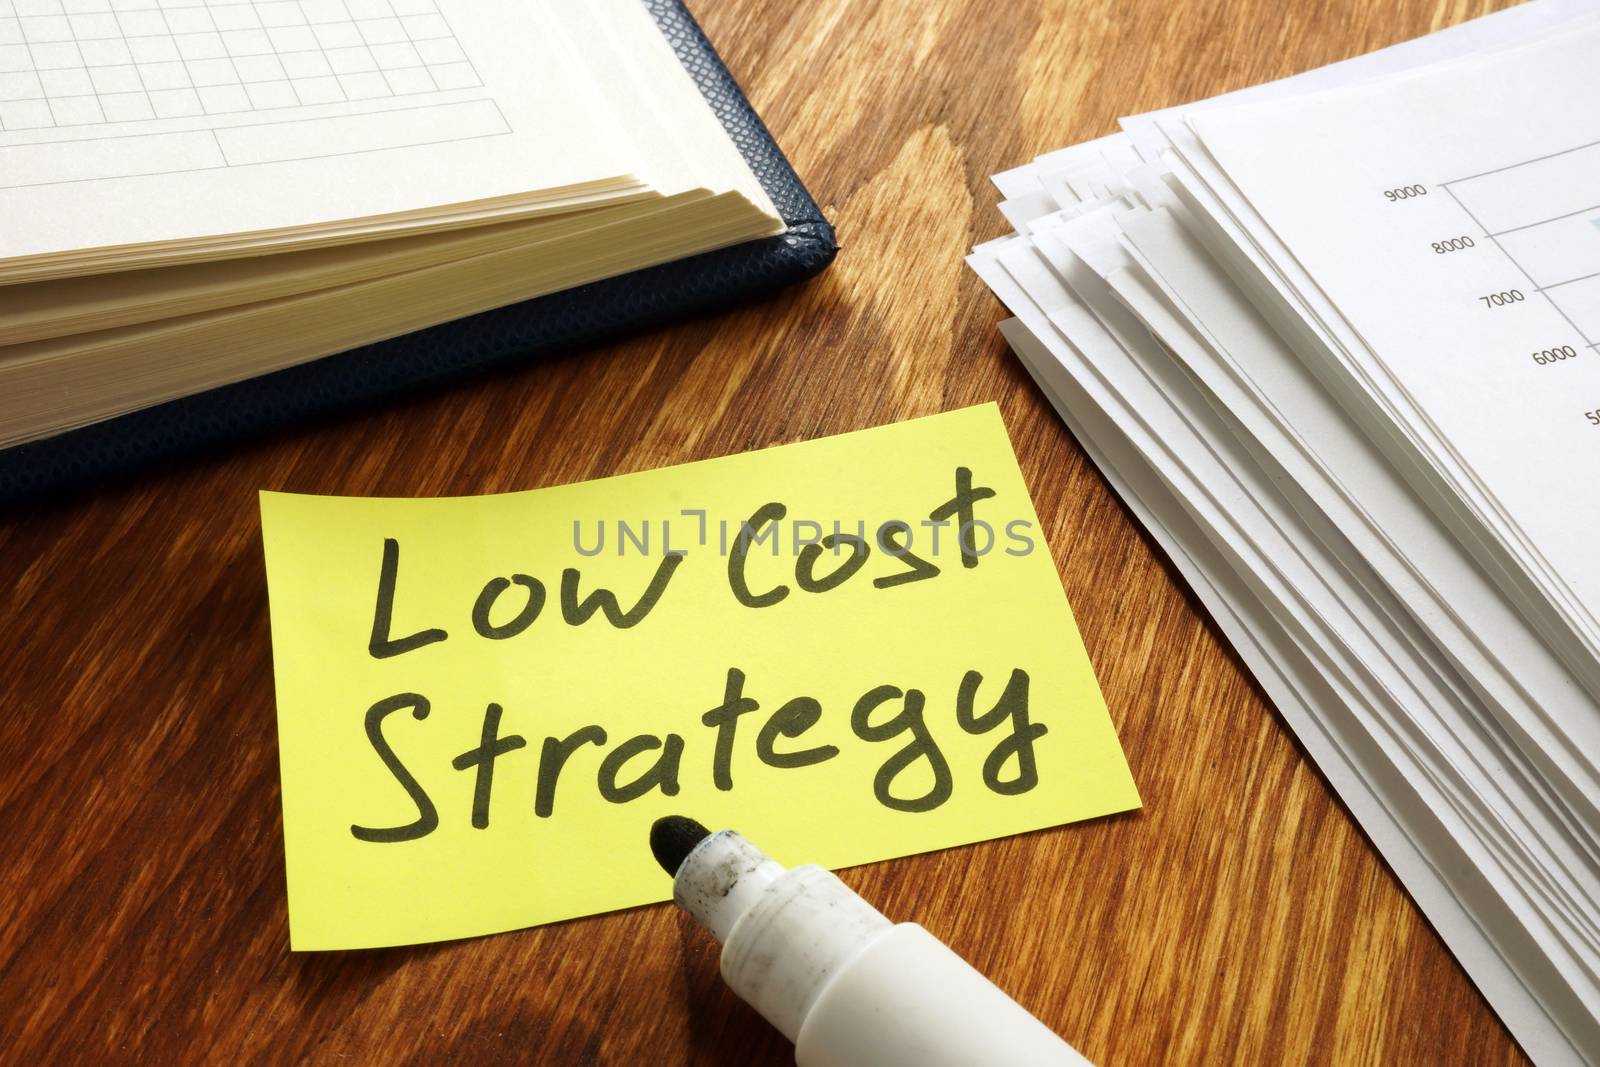 Low cost strategy sign and stack of papers.